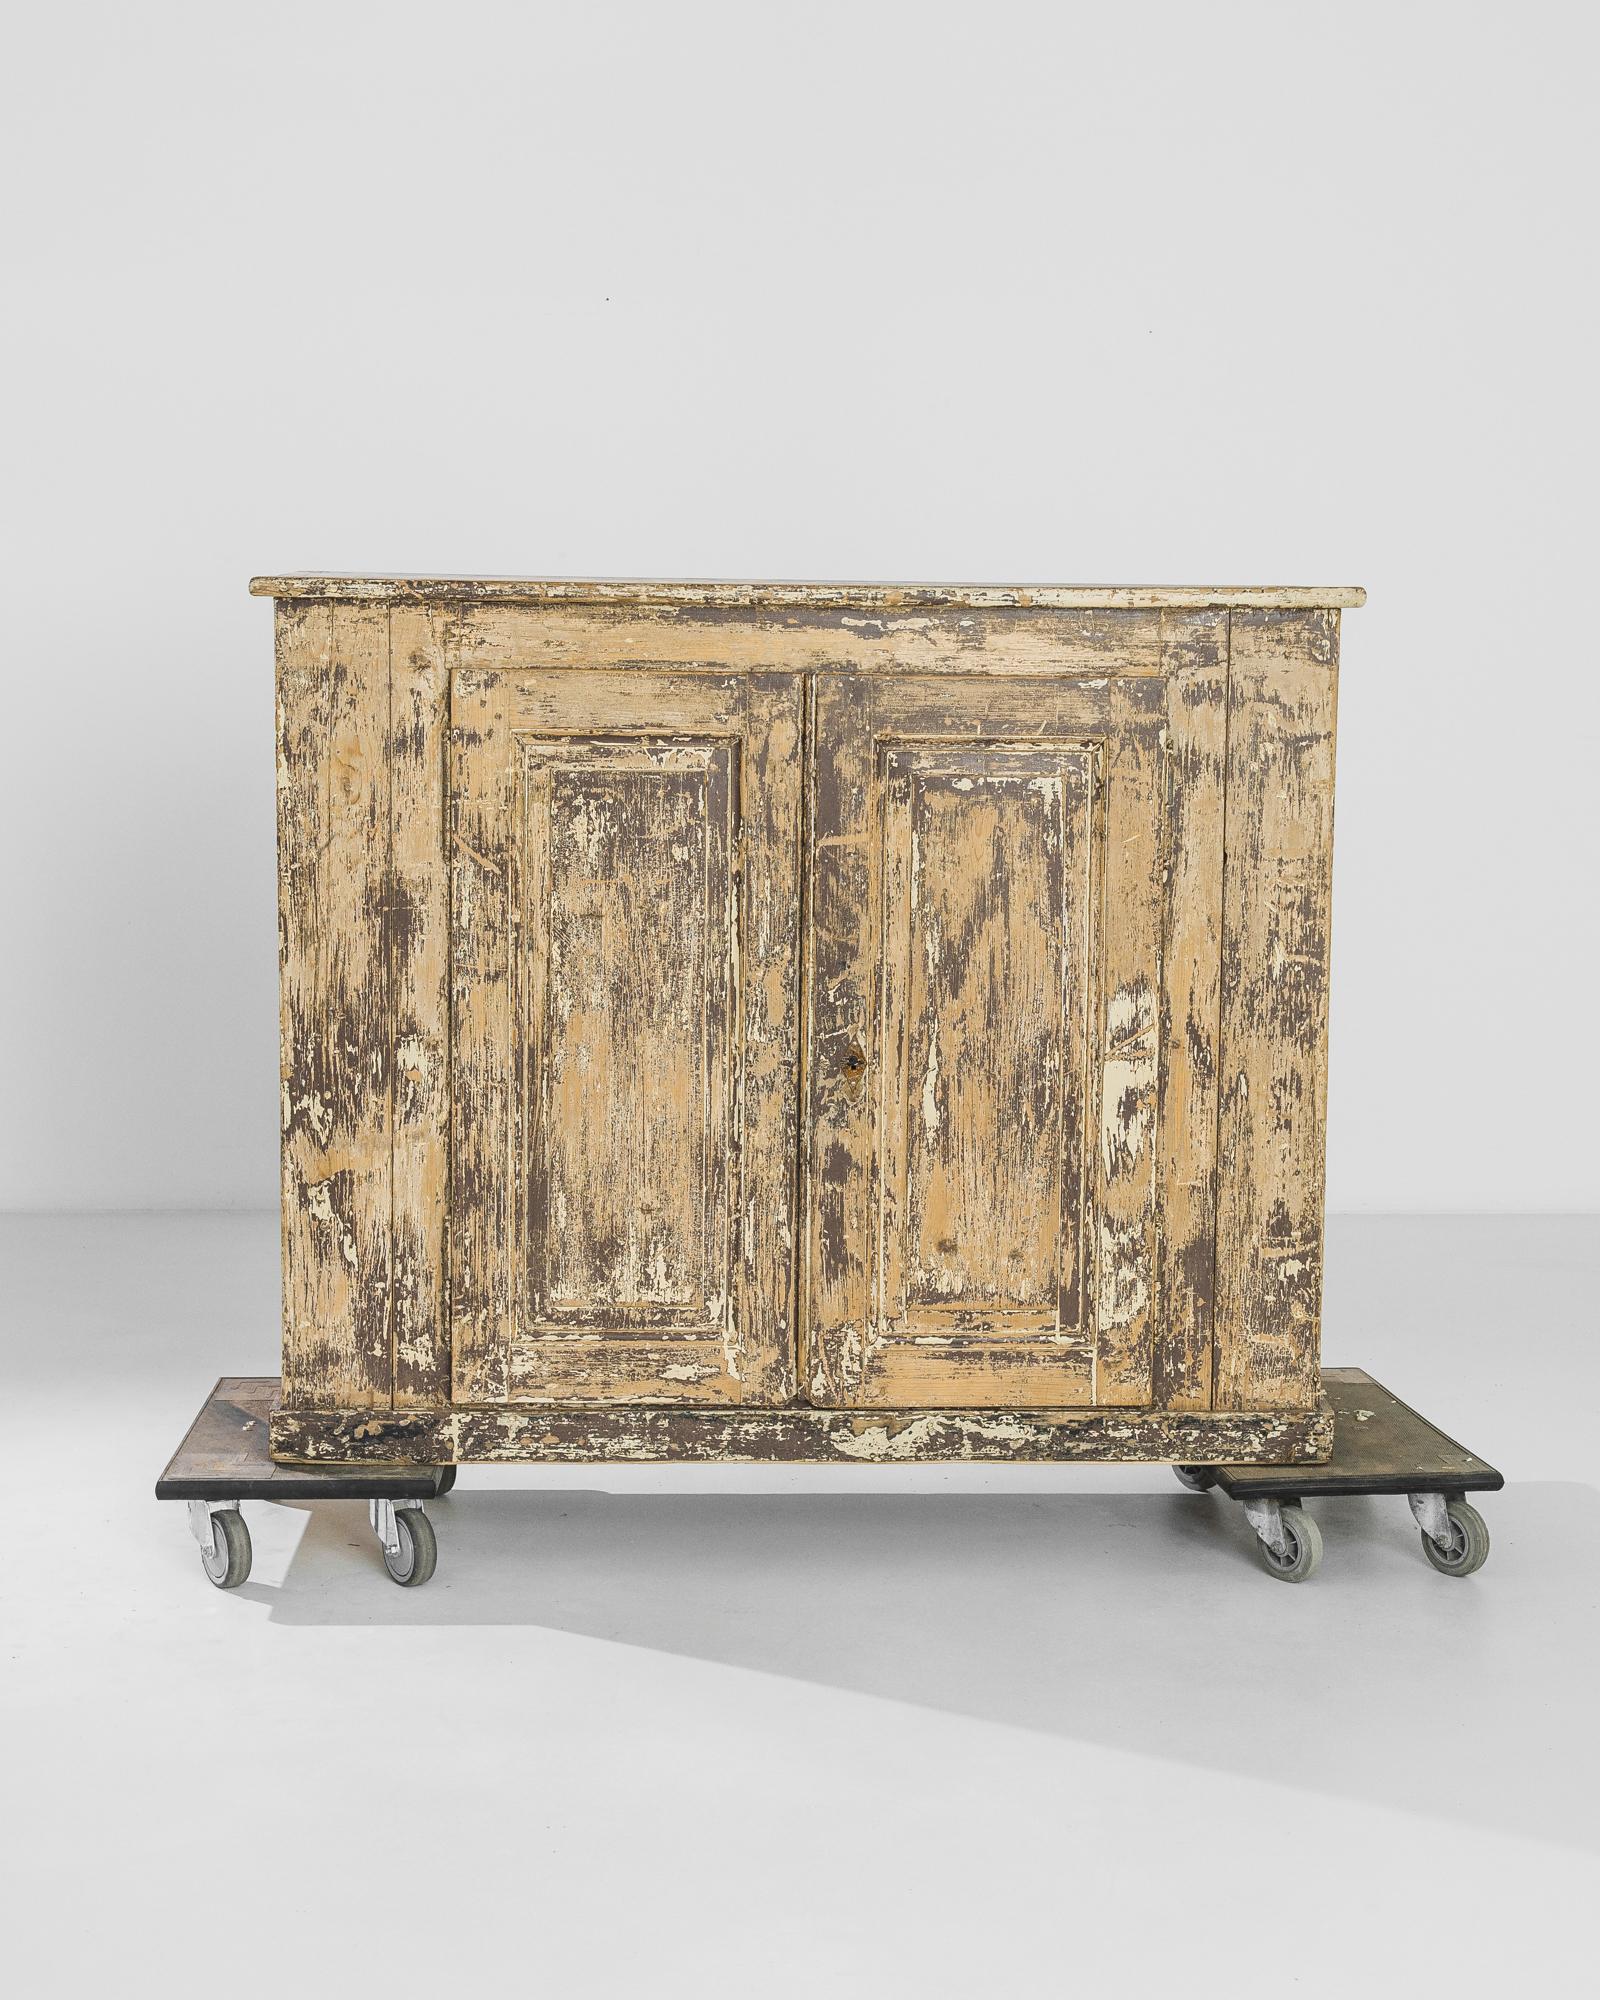 A wooden cabinet from 1830s France with an expressive patina. The surface of the wood is grazed and scraped, creating a dynamic texture and allowing glimpses of the various layers of paint and varnish that the piece has possessed over the years.